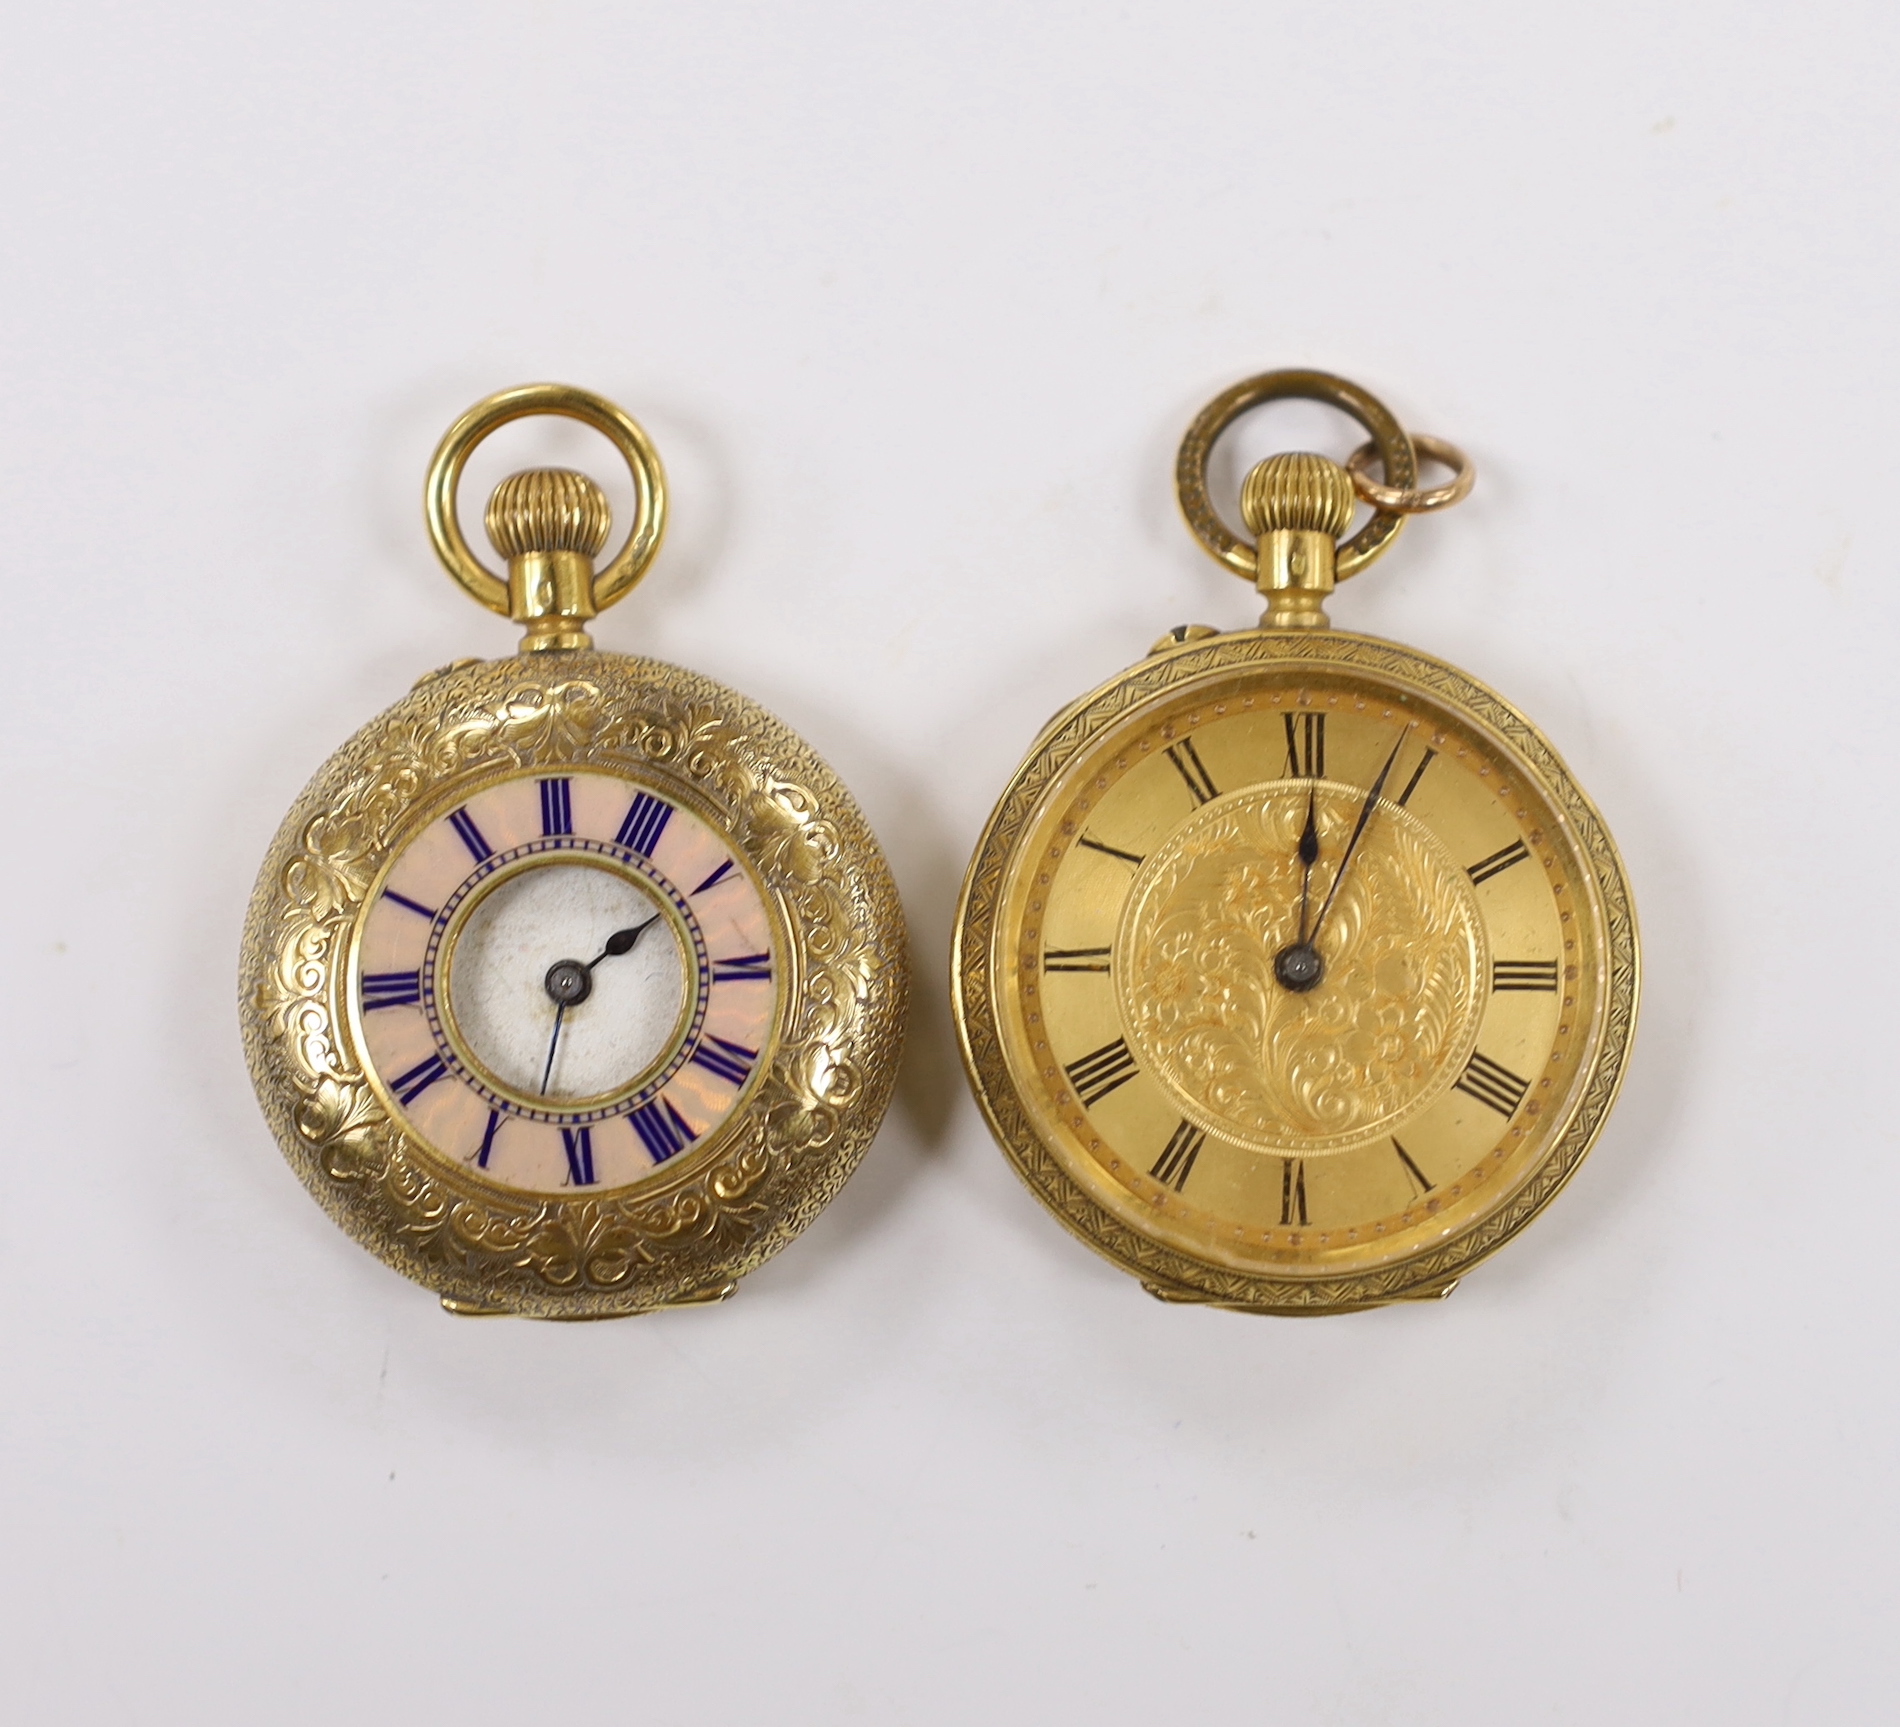 An early 20th century Swiss 18ct and enamel half hunter fob watch and one other 18k open face fob watch, with Roman dial, gross weight 86.8 grams.